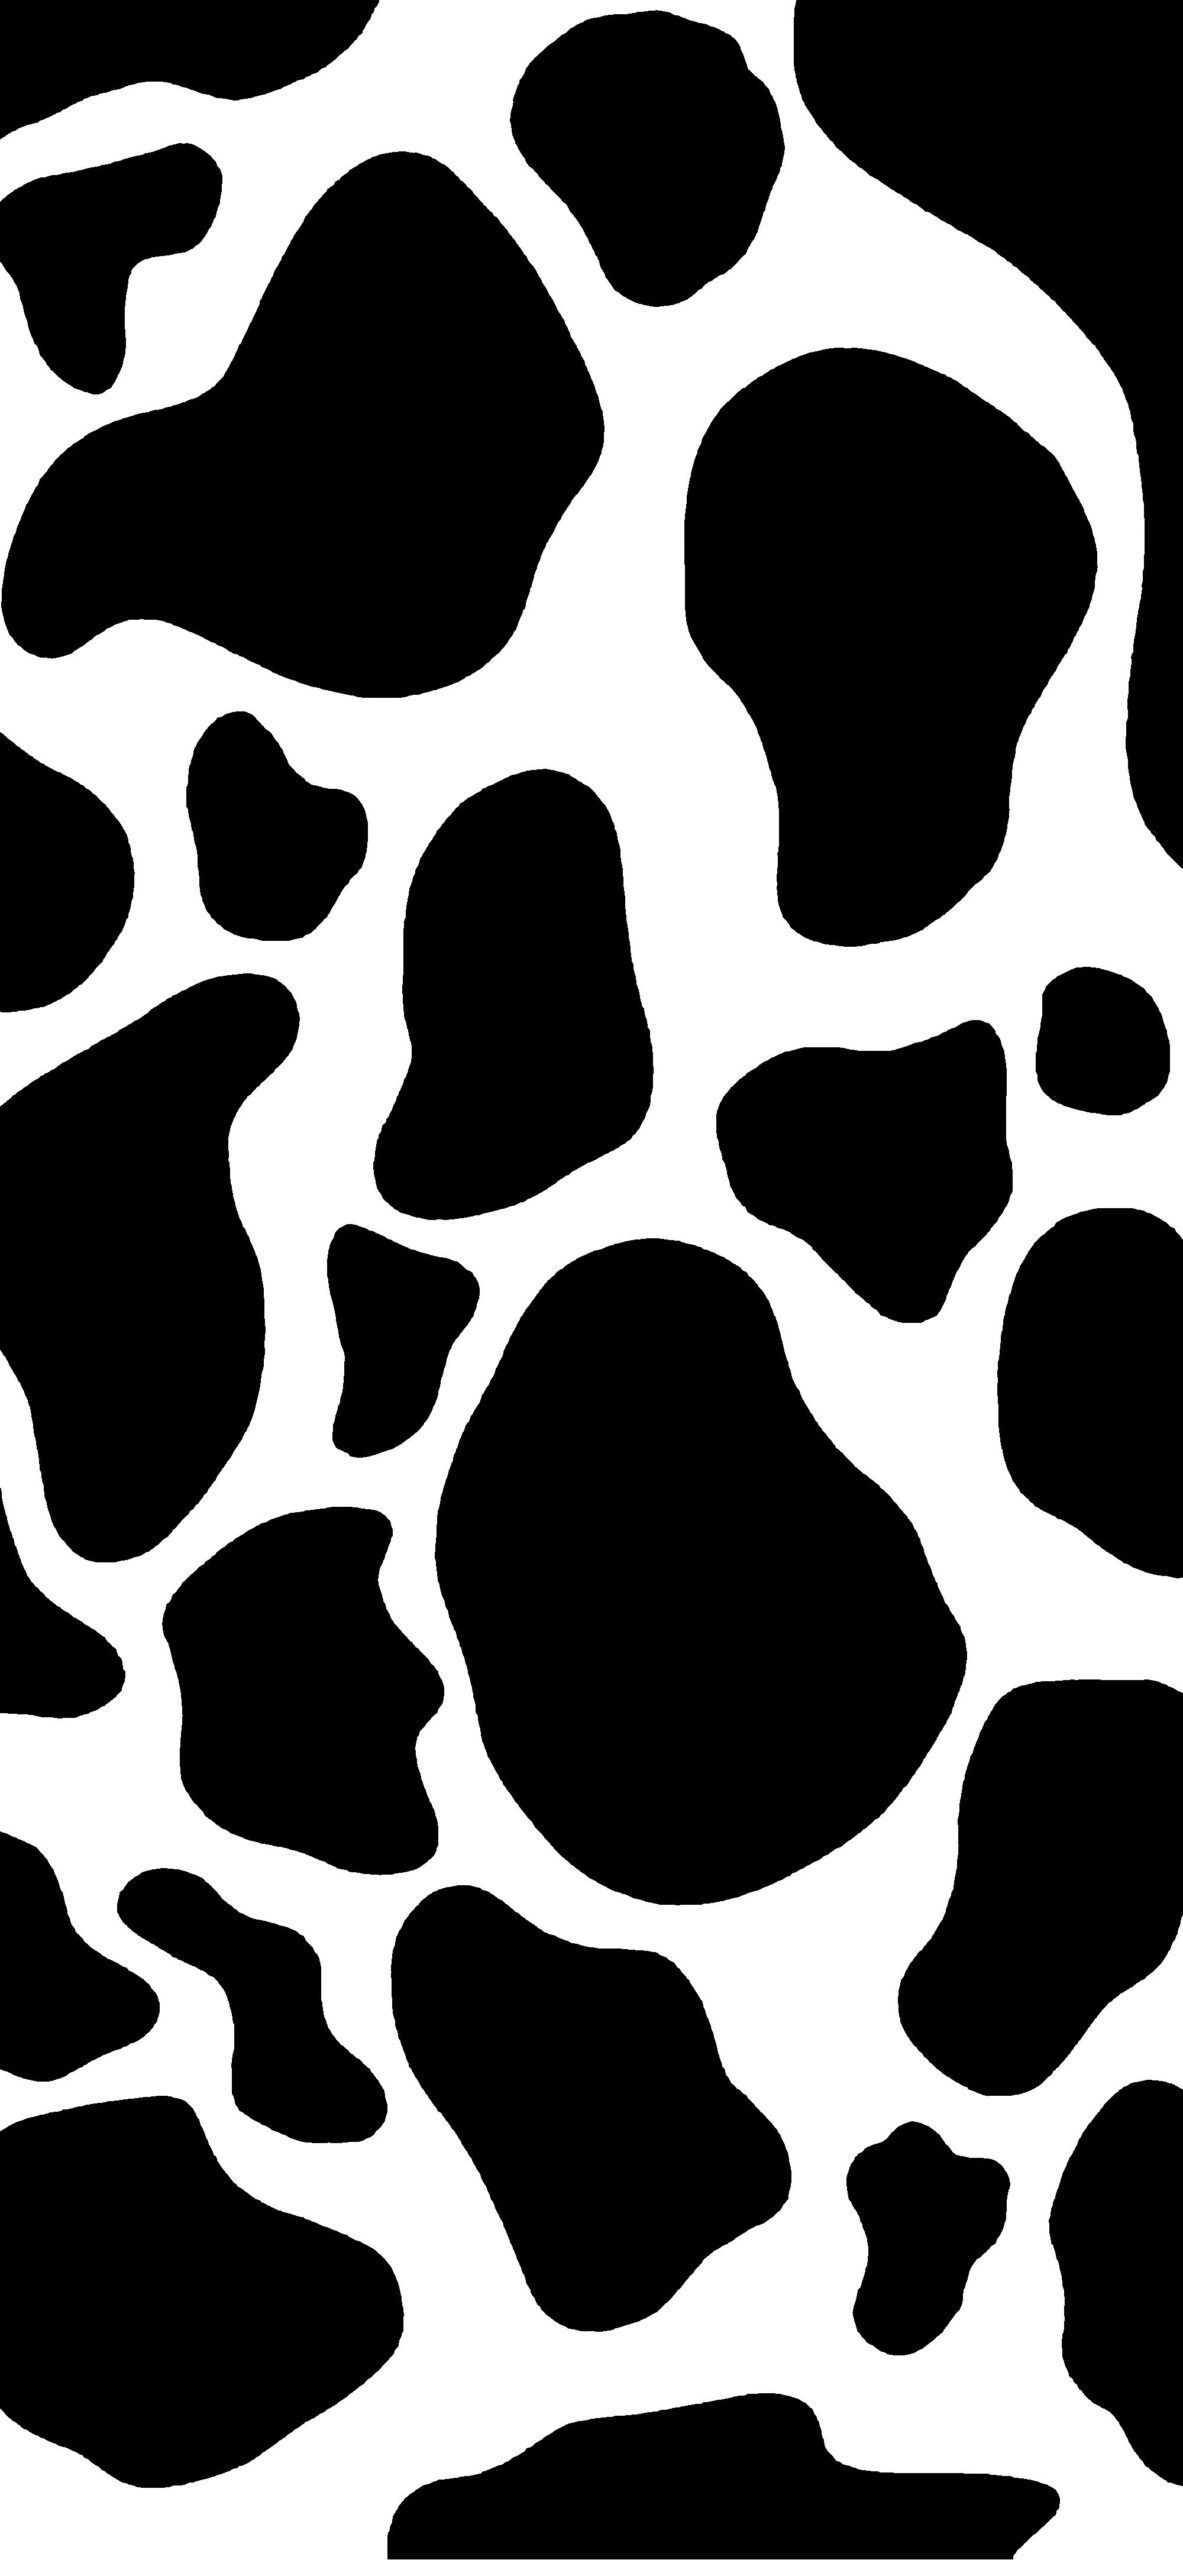 A cow pattern background image - White, pattern, cow, black and white